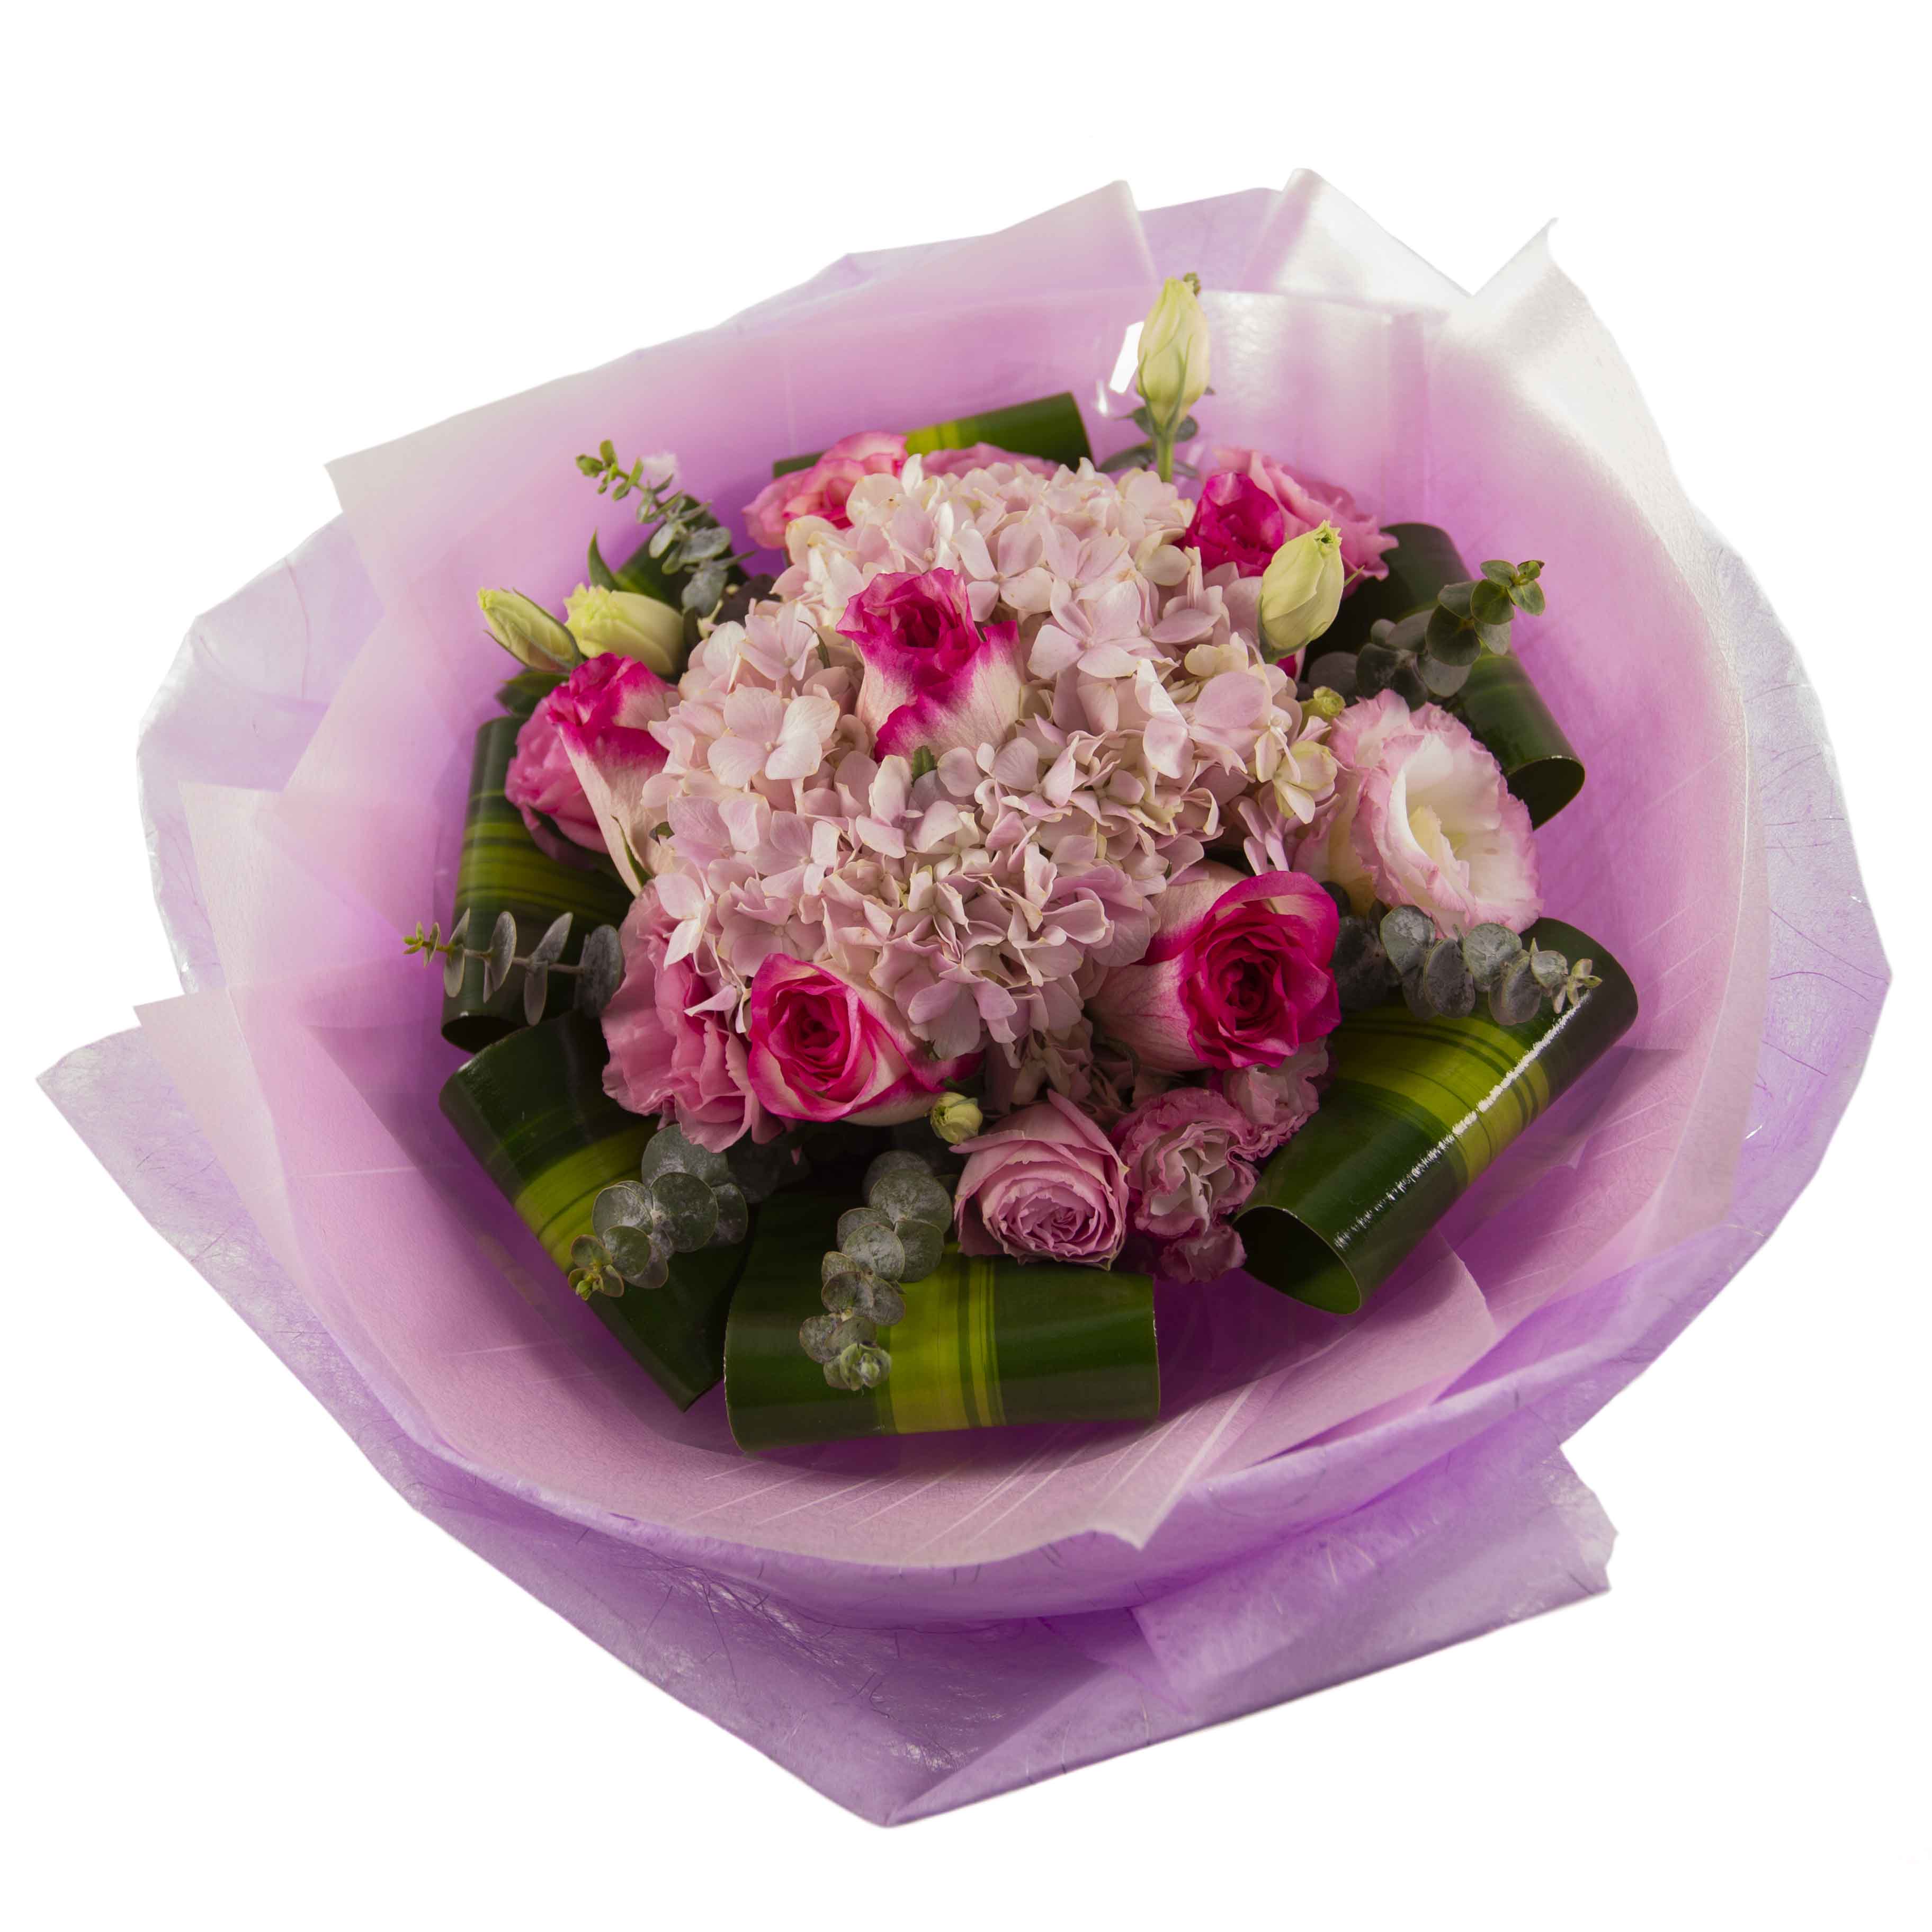 Gift Your Loved One a Pink Rose Bouquet Today!